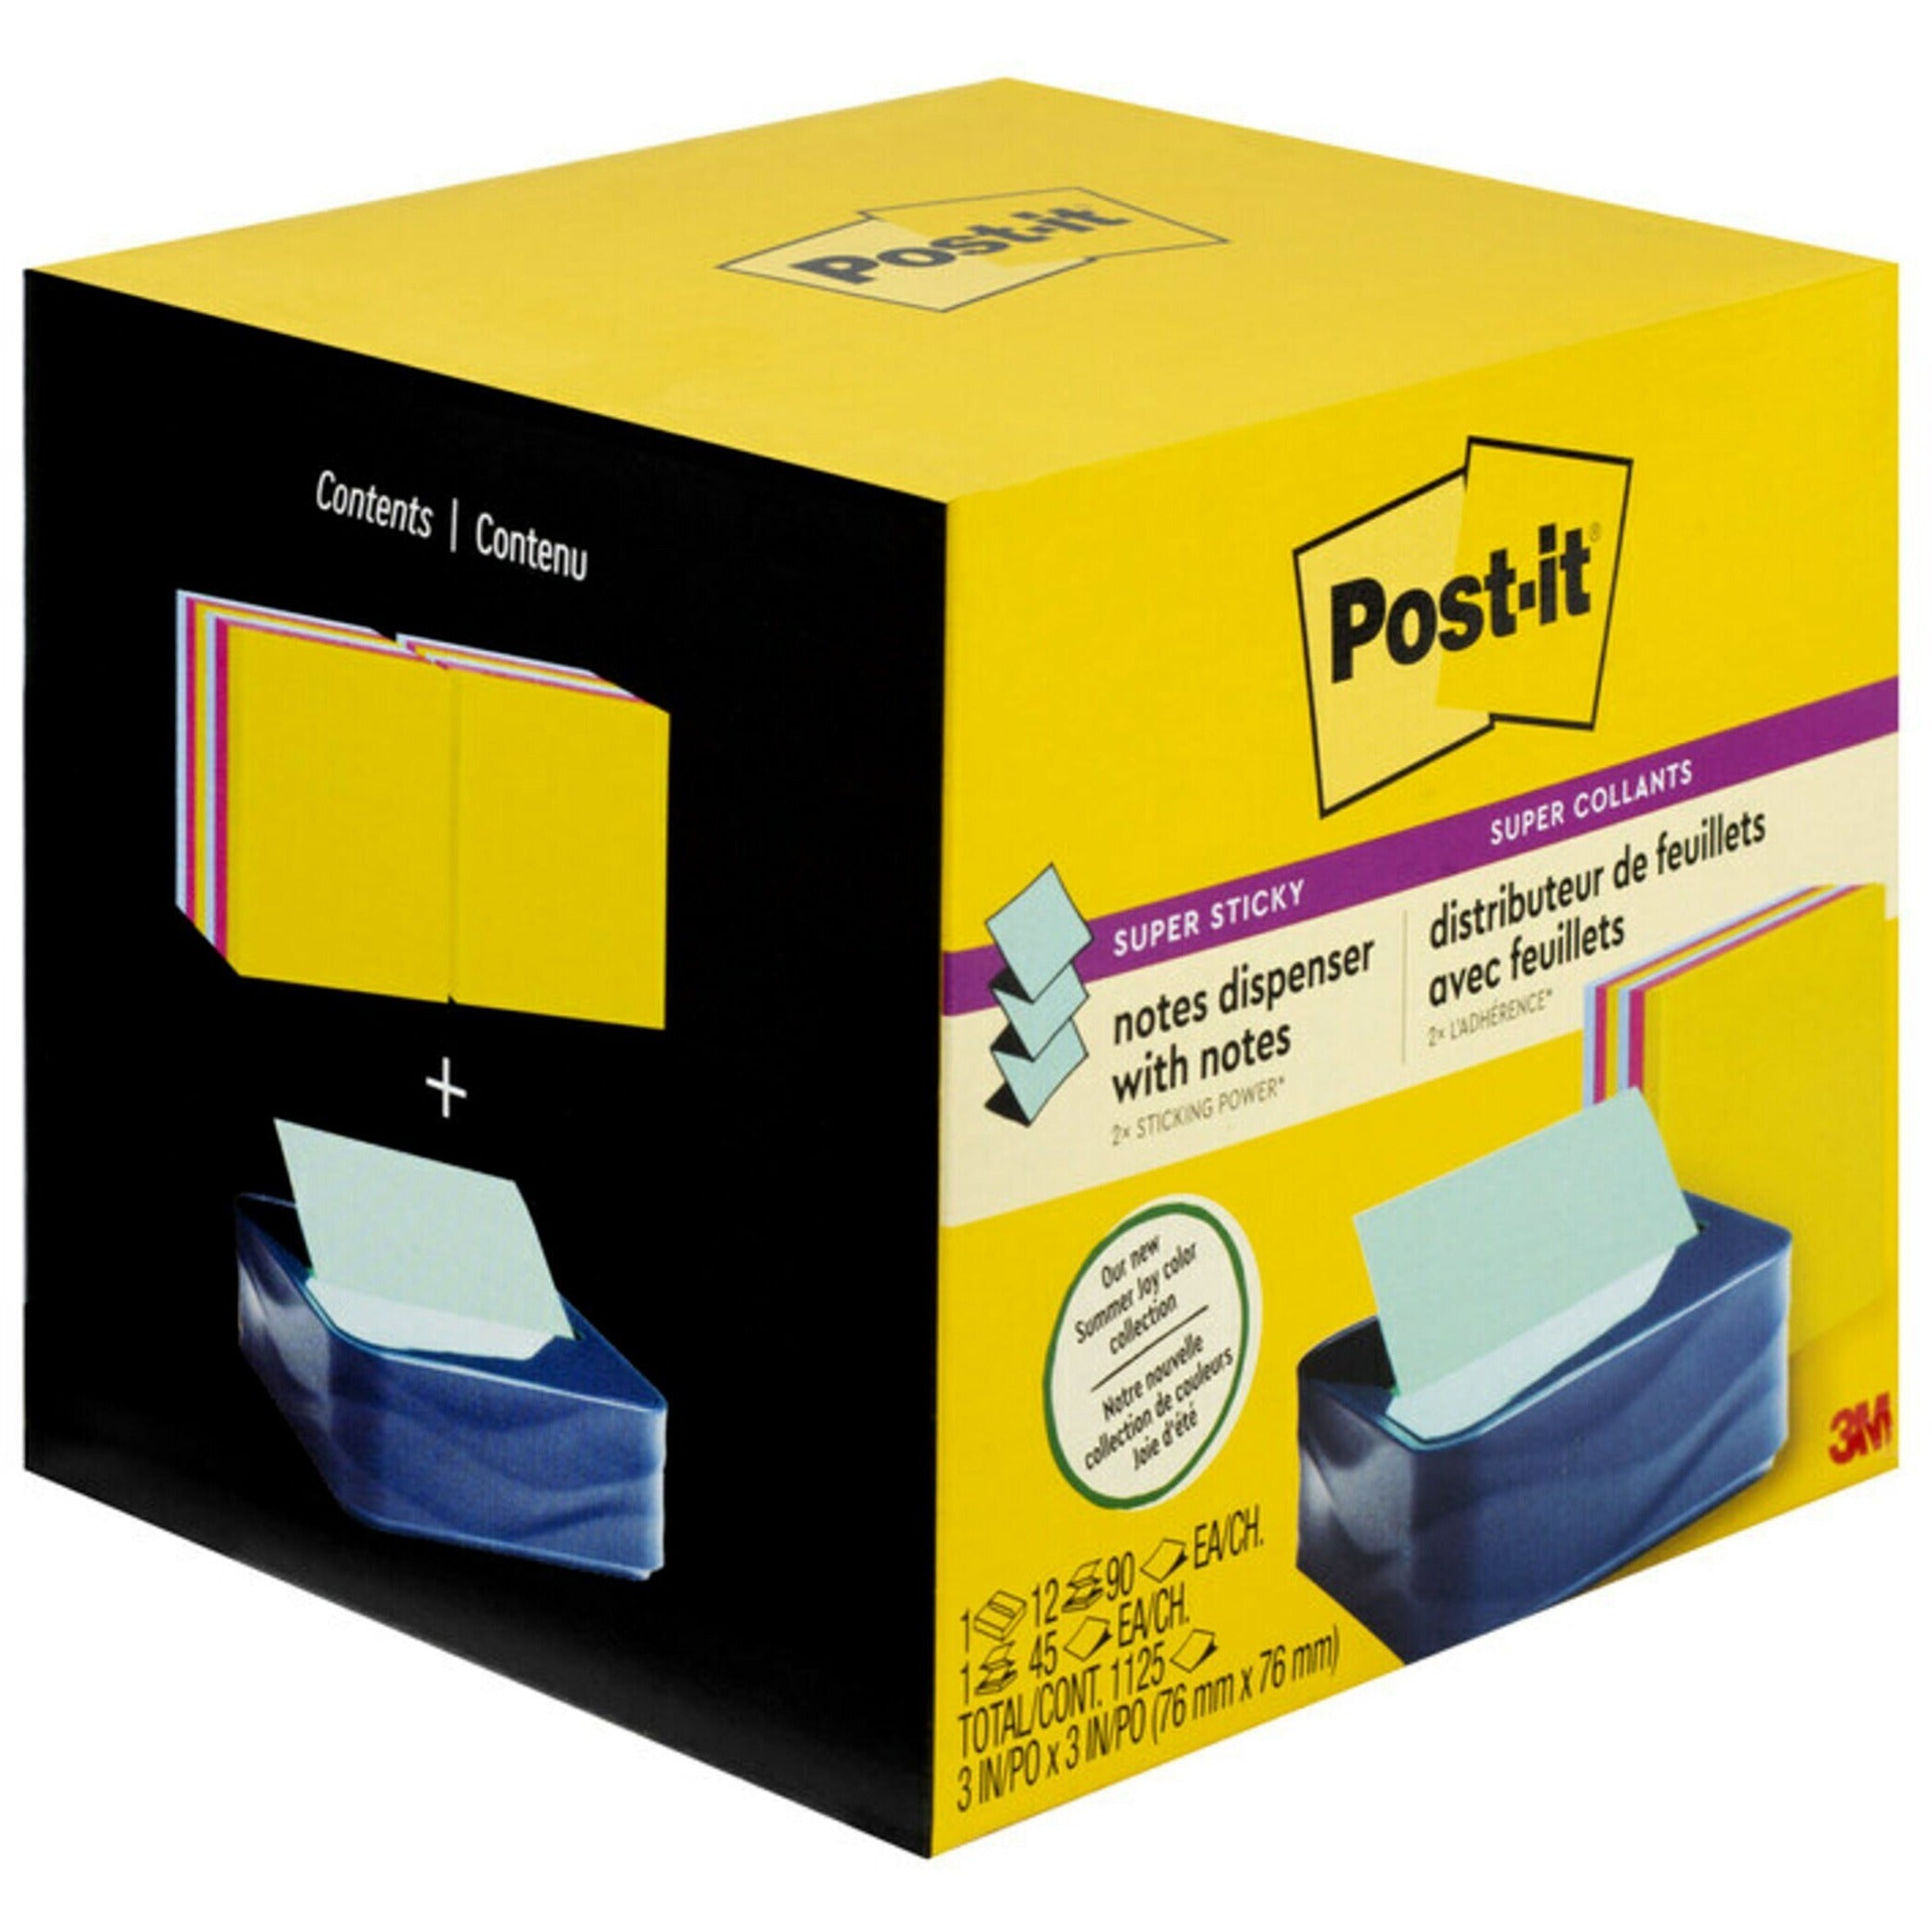 post-it-notes-dispenser-and-dispenser-notes-3-x-3-note-90-sheet-note-capacity-washed-denim-citron-yellow-power-pink_mmmwave330ssva - 5